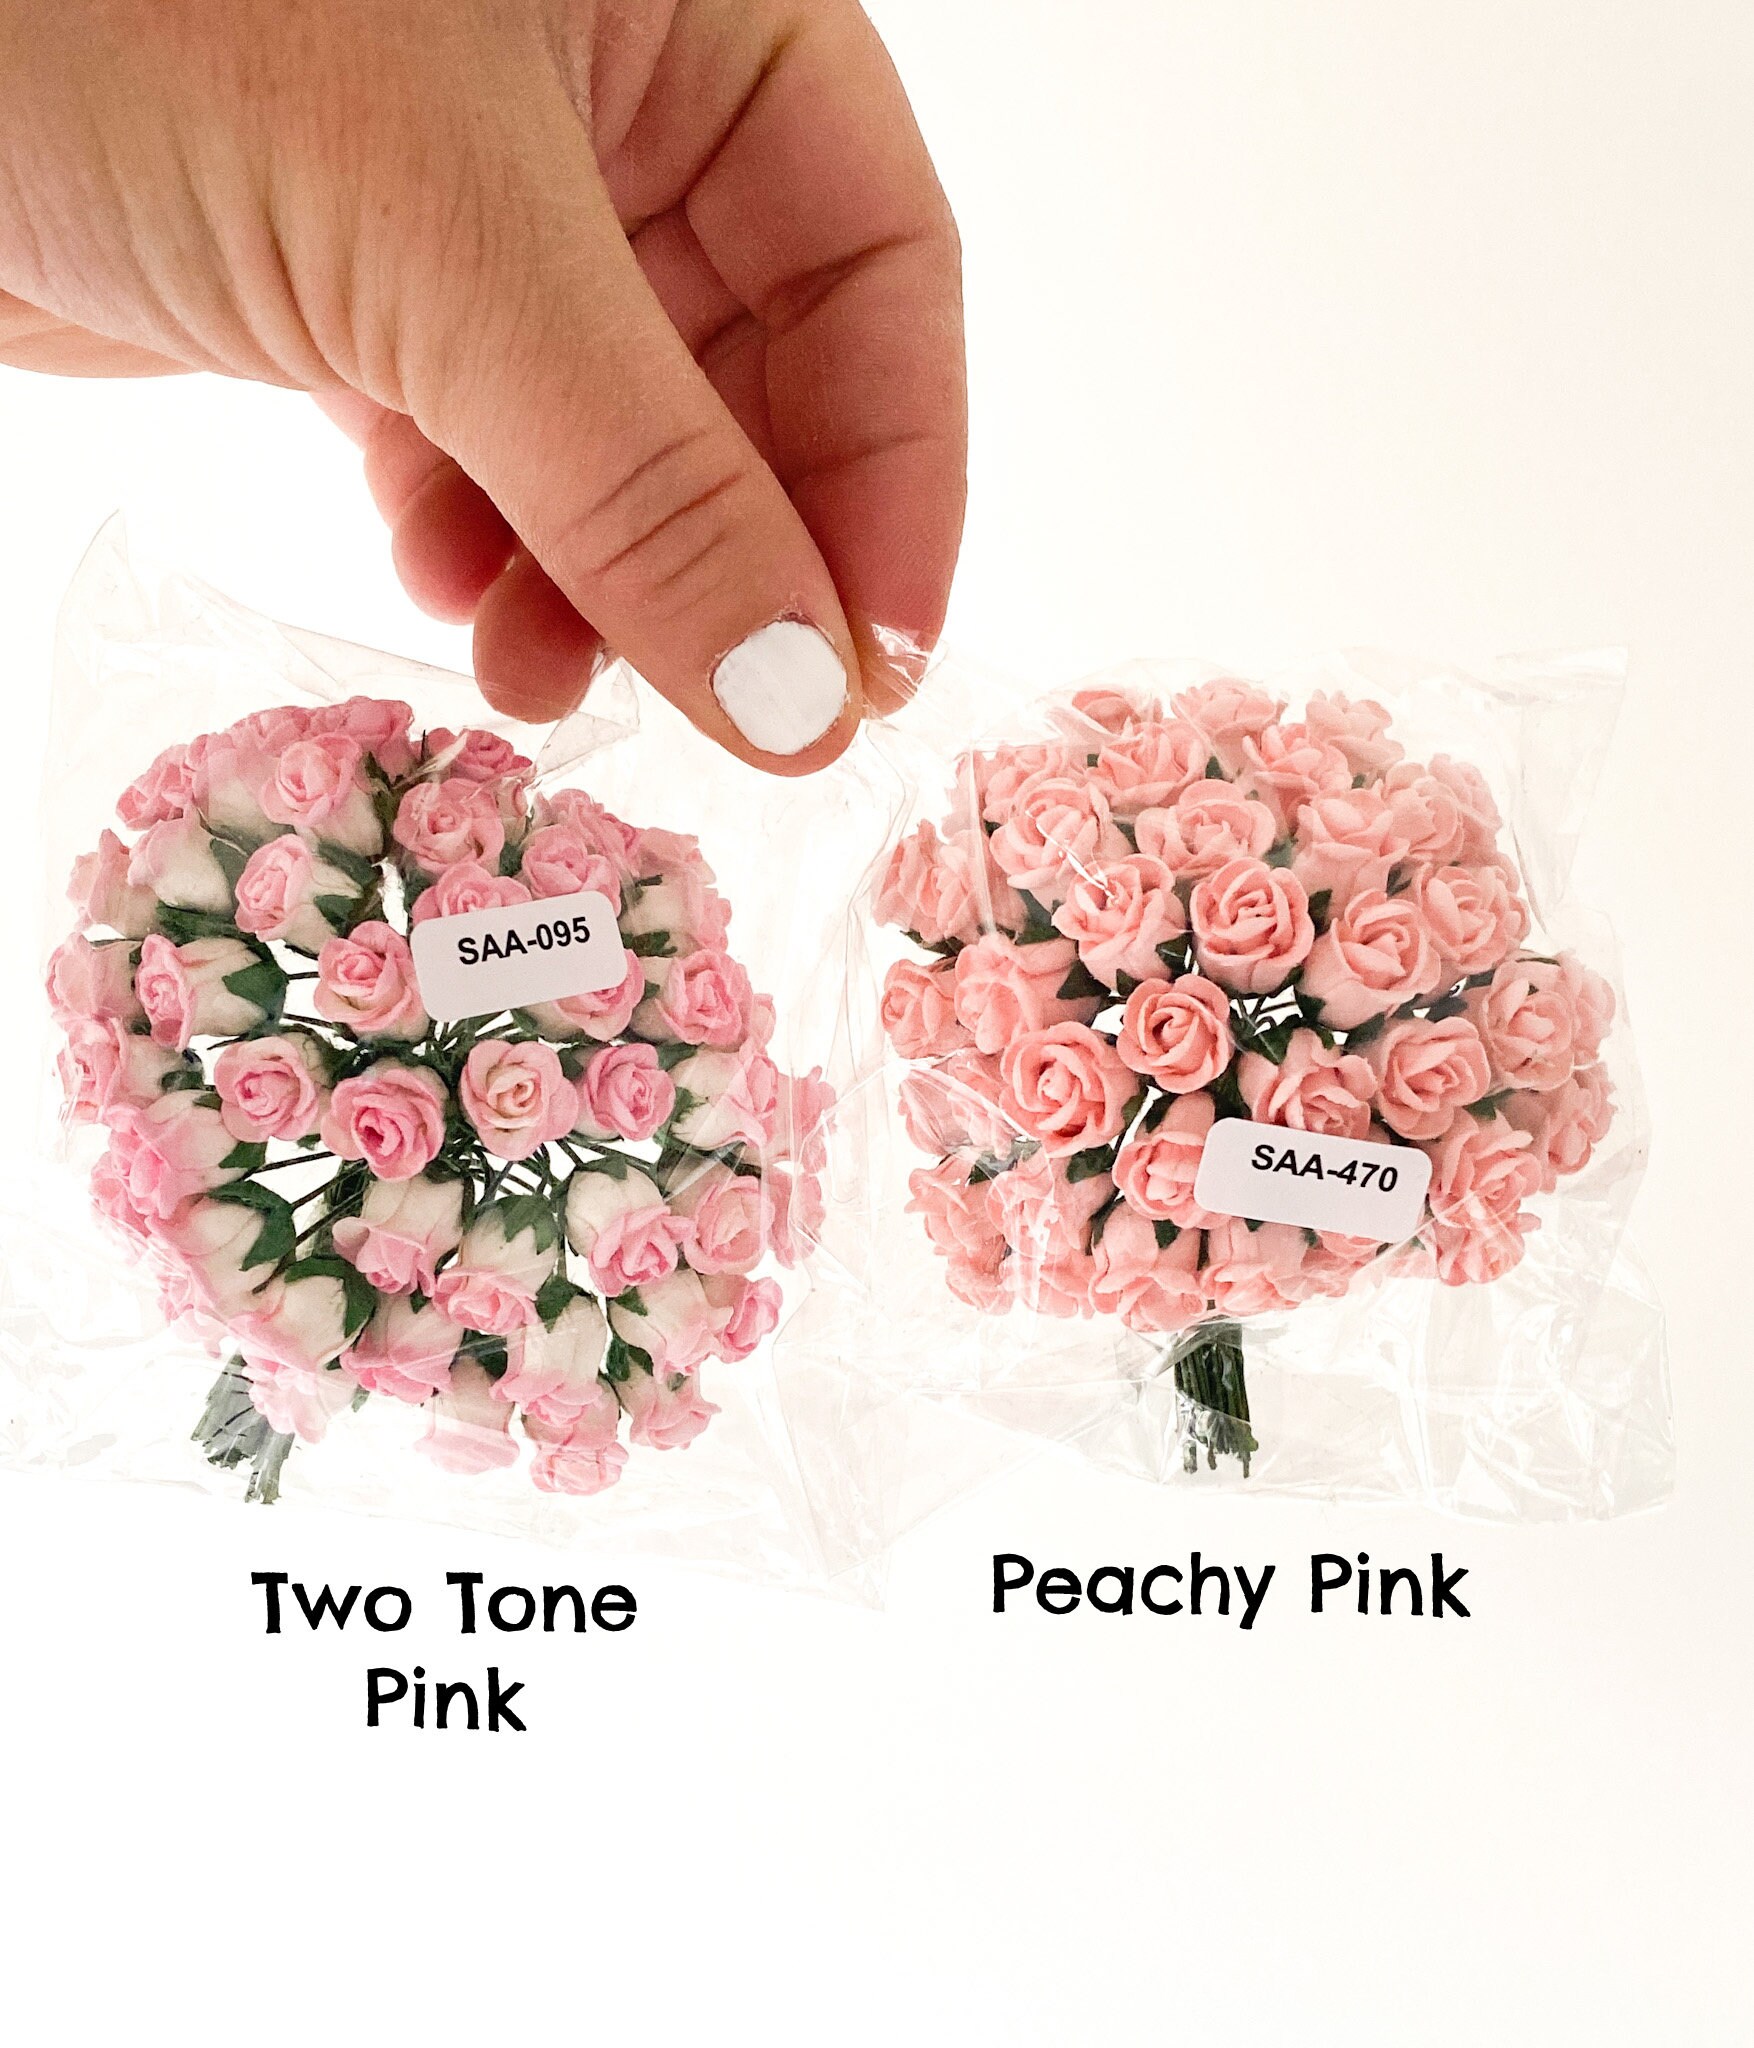  100 pcs Mini Rose Pink Color Mulberry Paper Flower 15mm  Scrapbooking Wedding Dollhouse Supplies Card, Small Roses. : Home & Kitchen